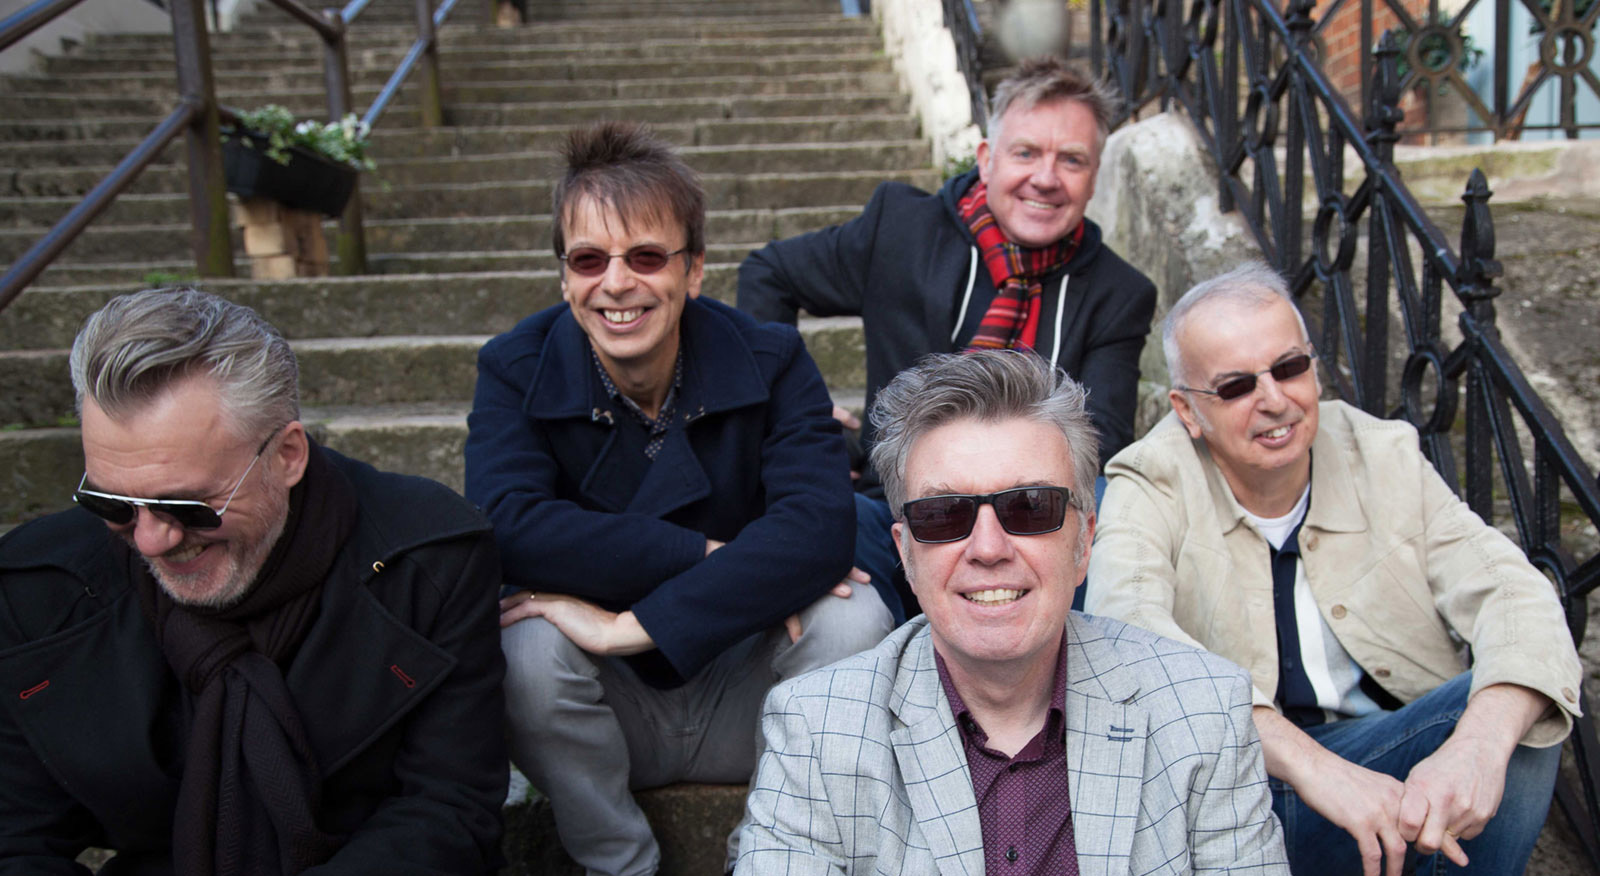 THE UNDERTONES have confirmed a run of UK live dates throughout October 